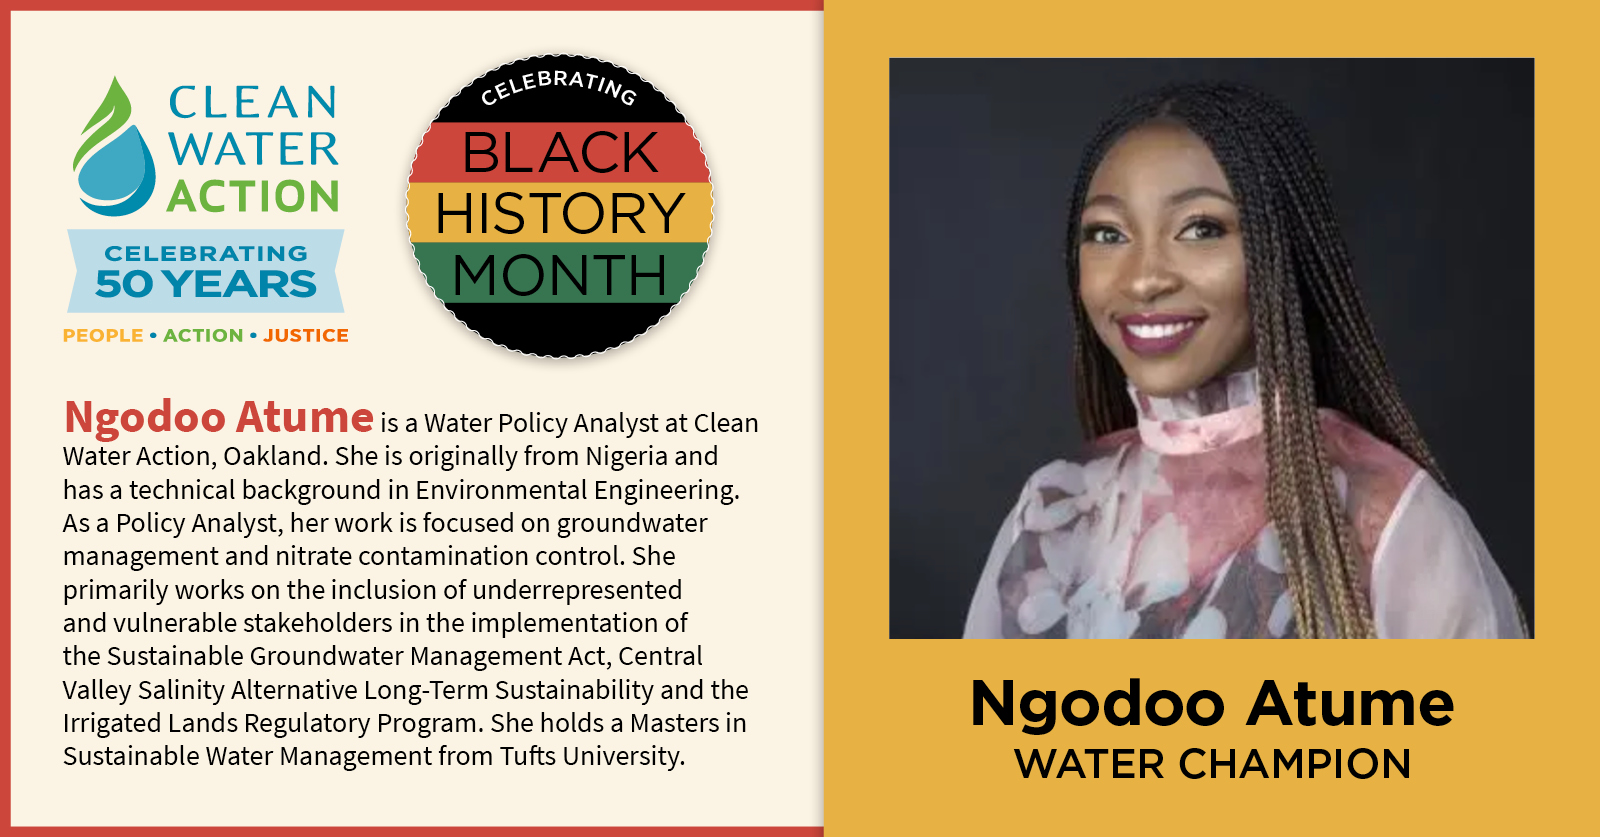 Black History Month Water Champion: Ngodoo Atume is a Water Policy Analyst at Clean Water Action, Oakland. She is originally from Nigeria and has a technical background in Environmental Engineering. As a Policy Analyst, her work is focused on groundwater management and nitrate contamination control. She primarily works on the inclusion of underrepresented and vulnerable stakeholders in the implementation of state water and groundwater regulation and planning.